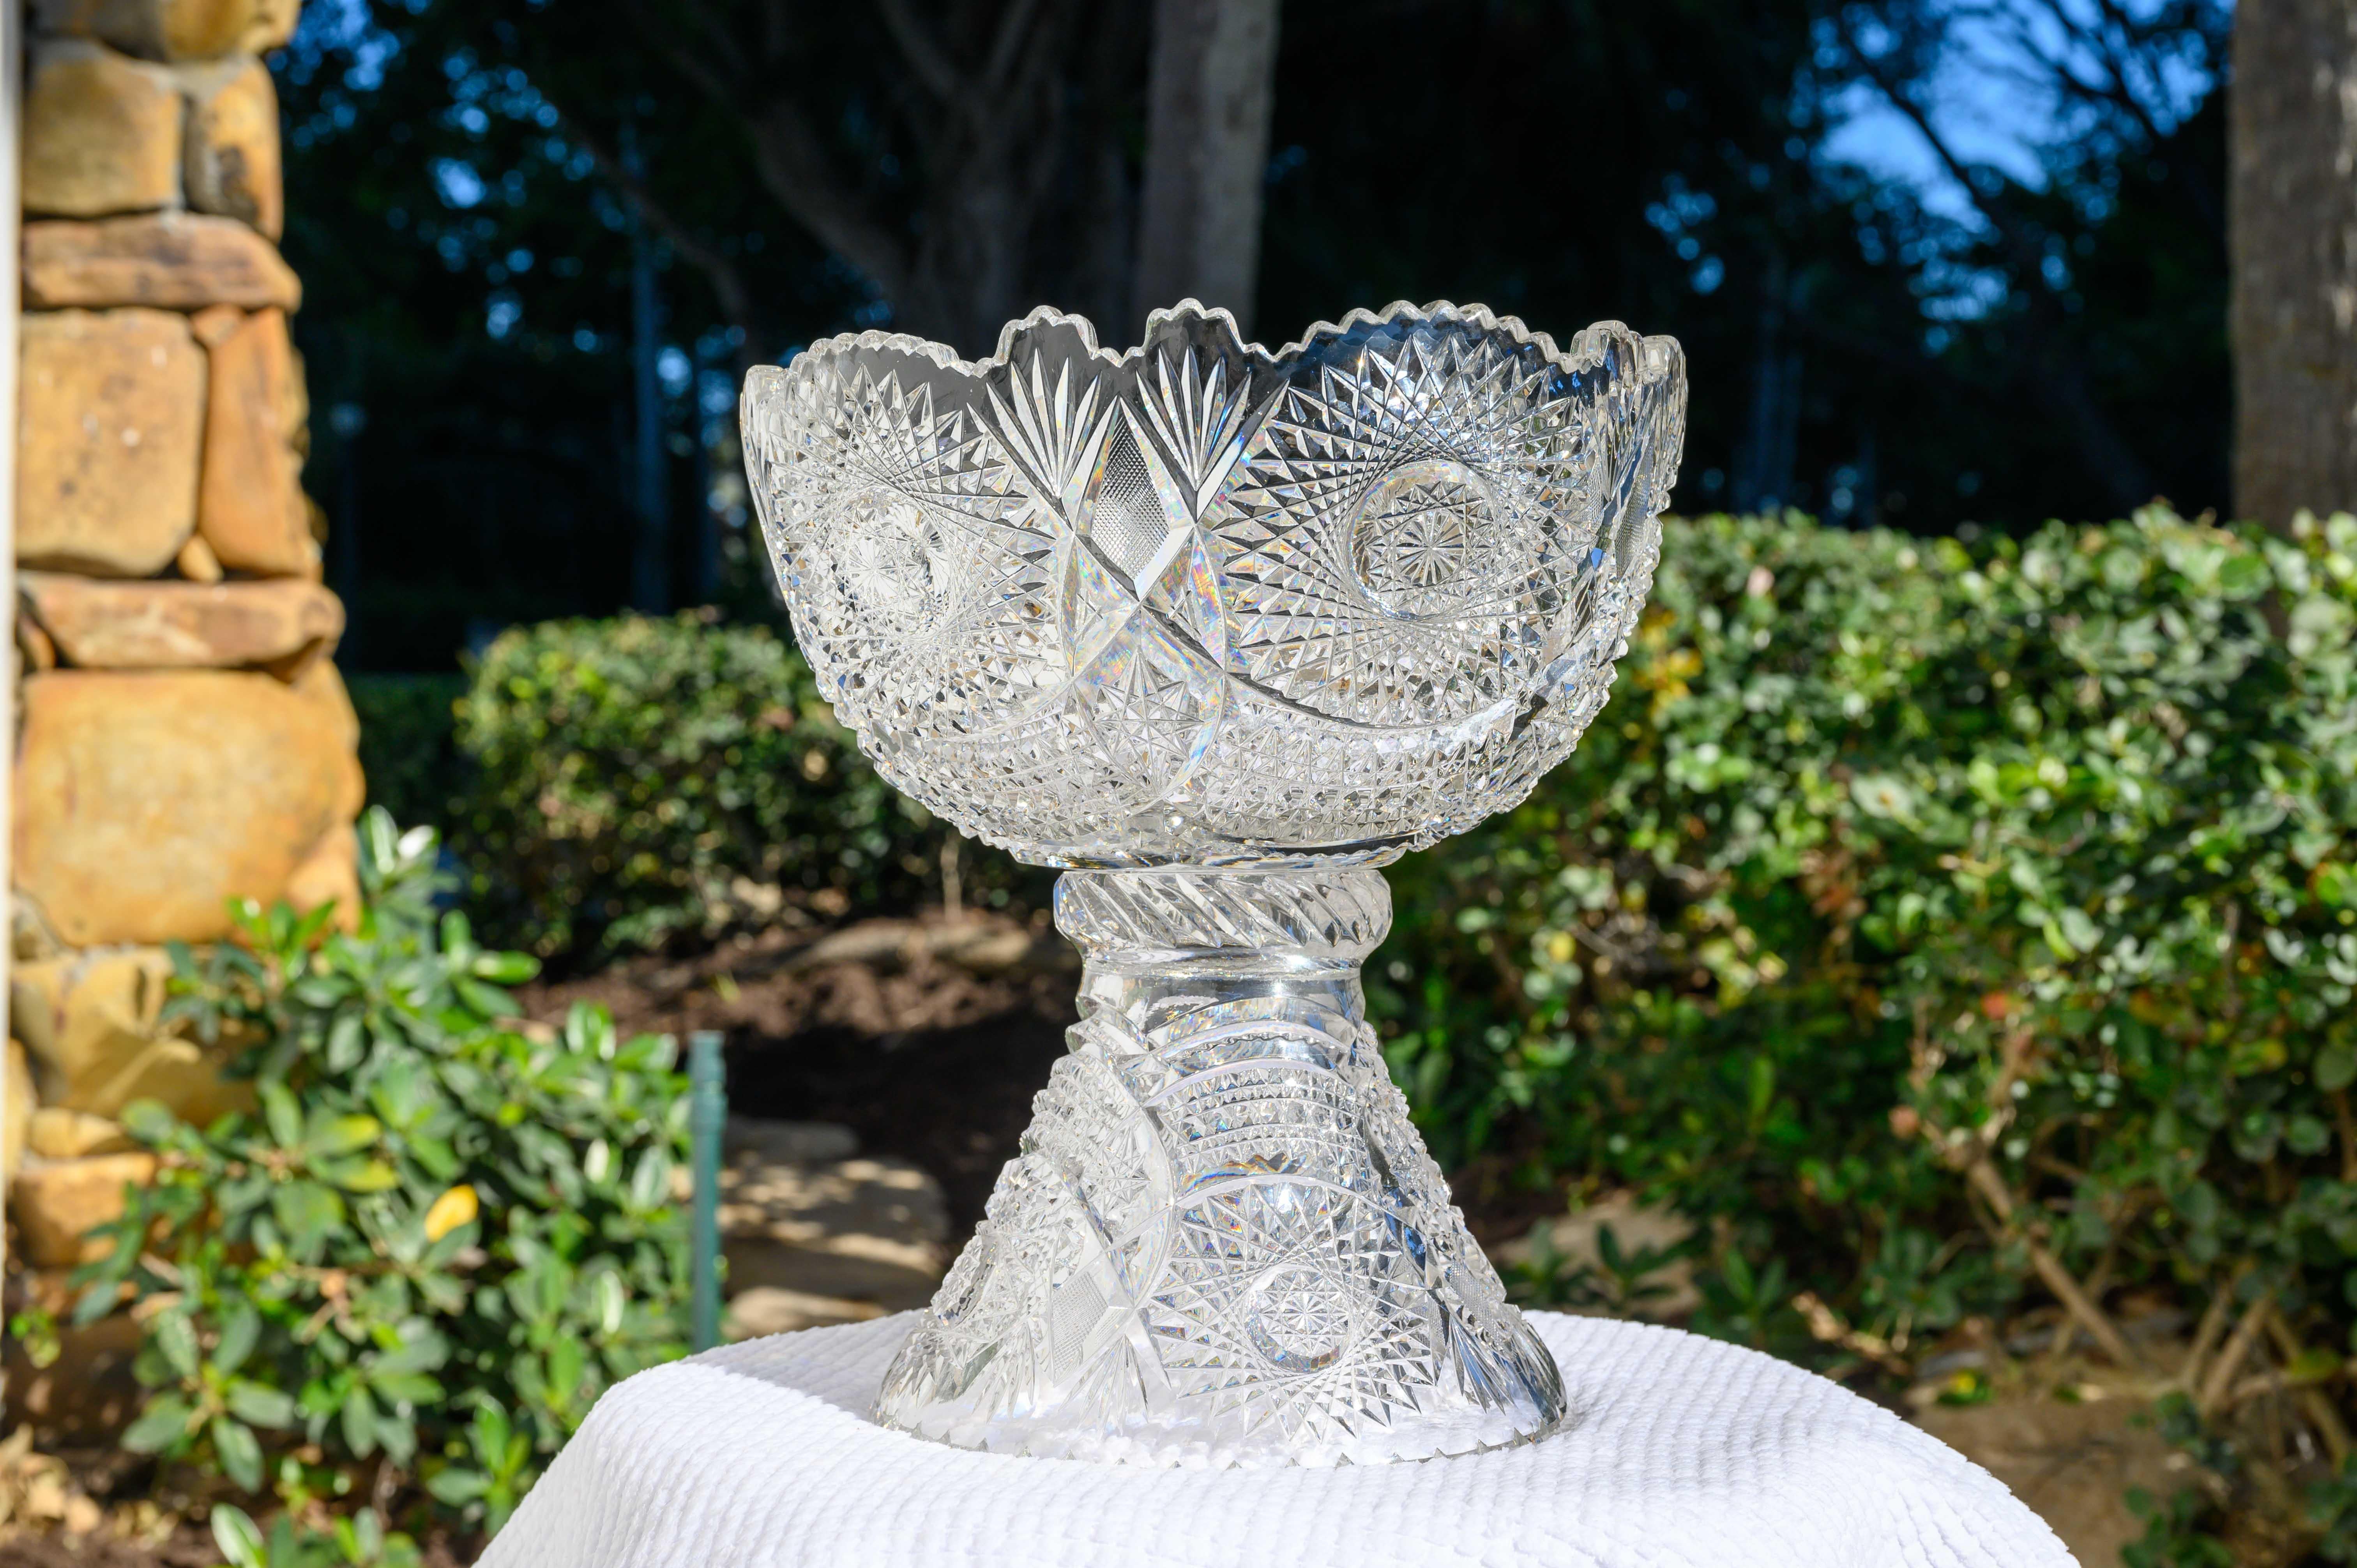 A crystal masterpiece of exceptional proportions, this finely cut crystal footed bowl or bowl on a pedestal exemplifies extraordinary craftsmen. The deep diamond-cut bevels produce infinite reflections as shown in the images that we photographed in